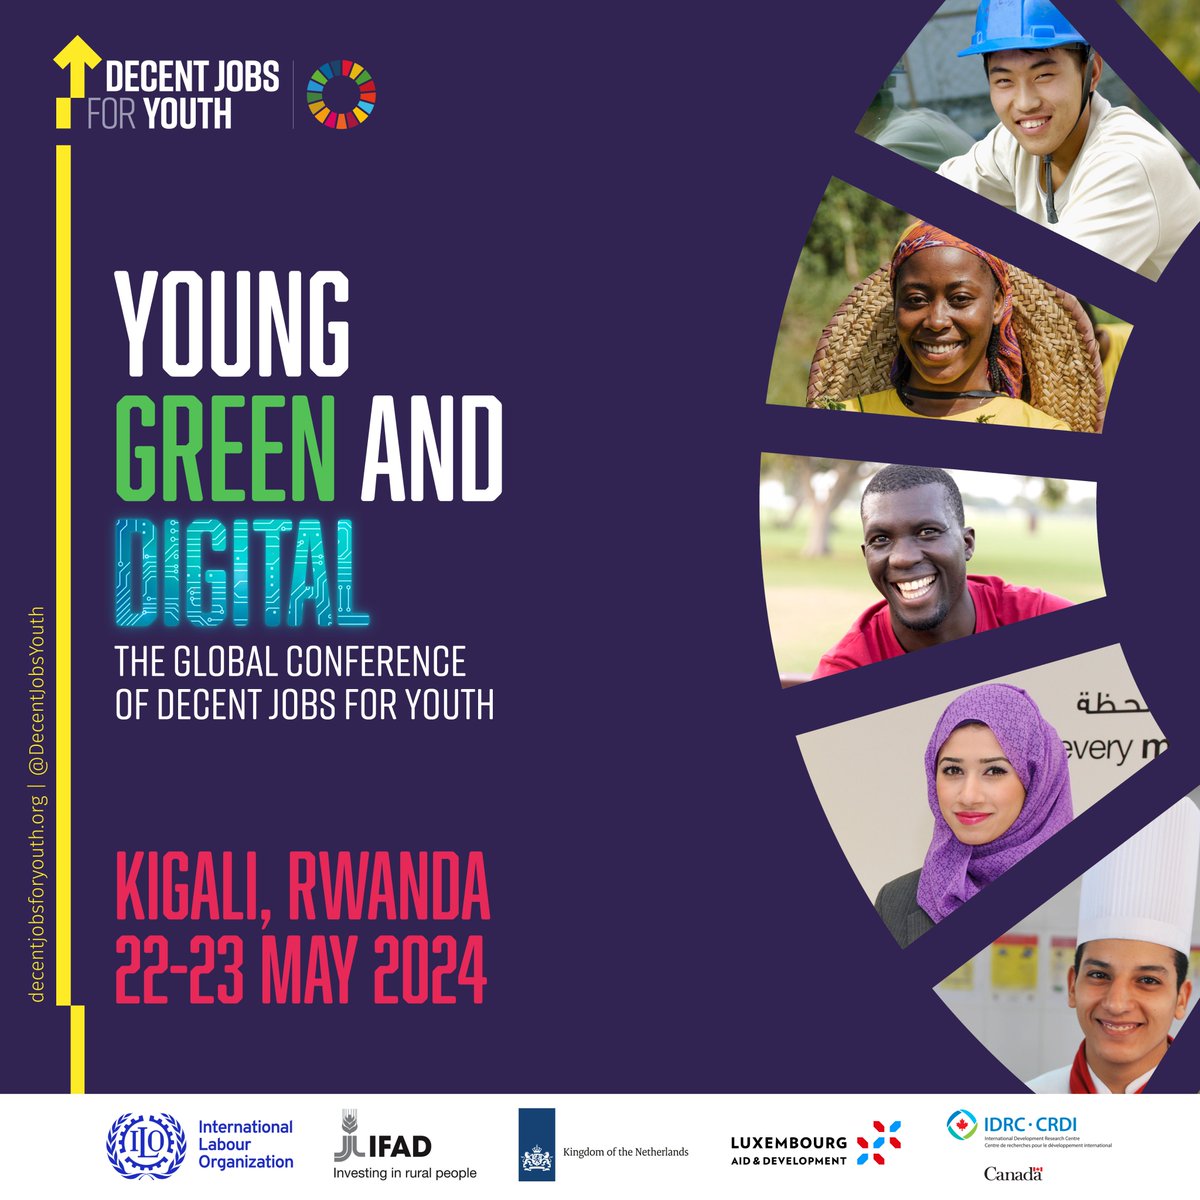 Our very own @ritarhoda33 will be at the Global Conference of decent jobs for Youth in Rwanda. We are excited to learn about innovative actions to support young people's green and digital transitions.🌍📚 #DecentJobsforyouth #VVOBinuganda #educationfordevelopment